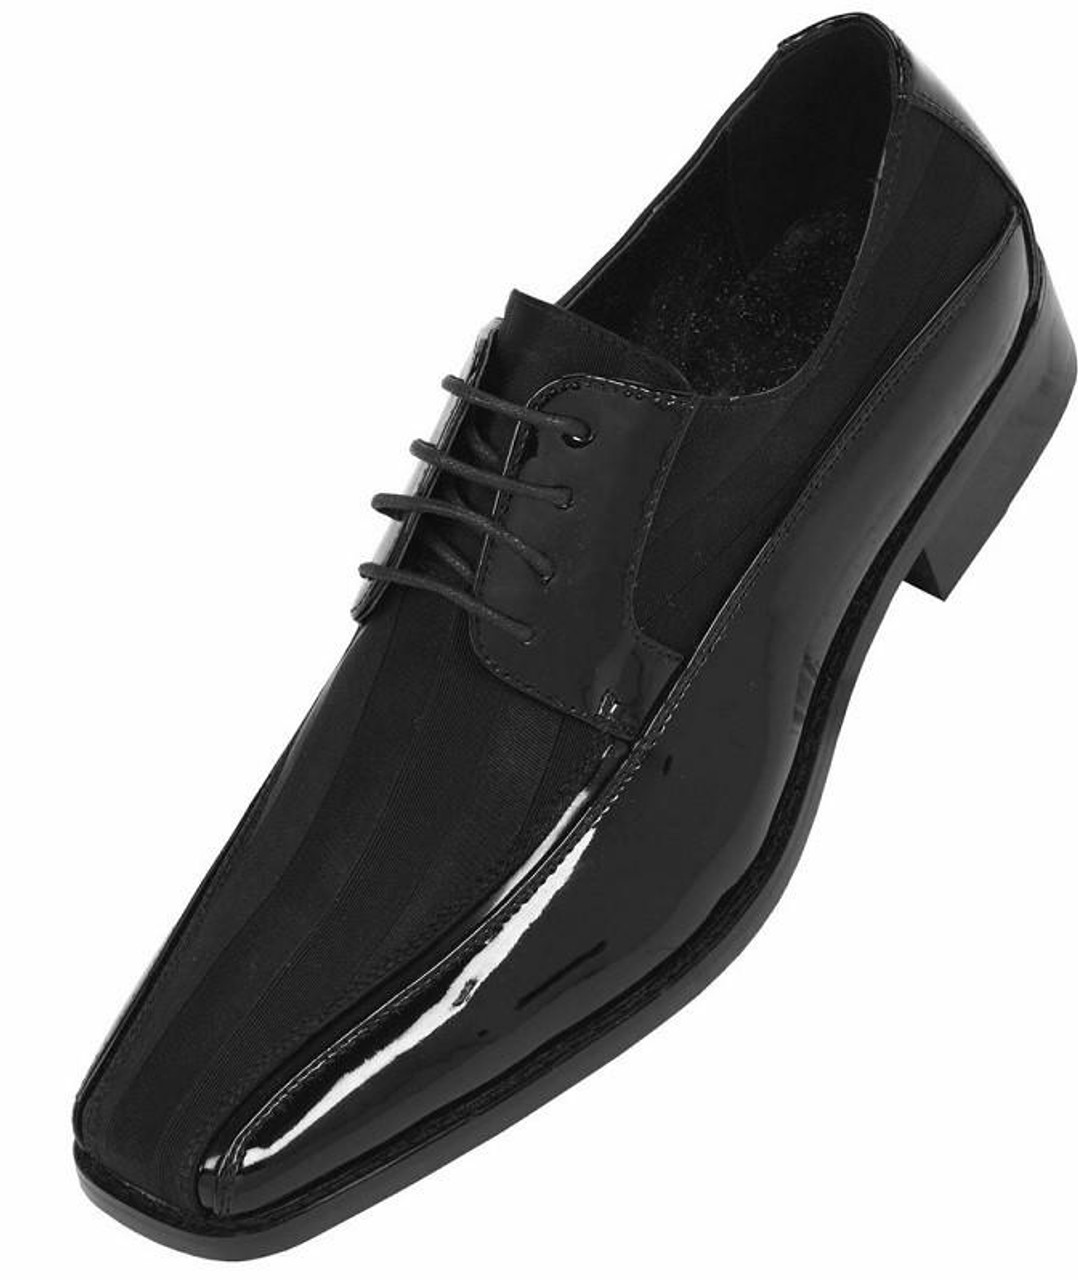 Men's Formal Lace Up Patent Leather Tuxedo Dress Shoes Shiny Wedding Oxfords